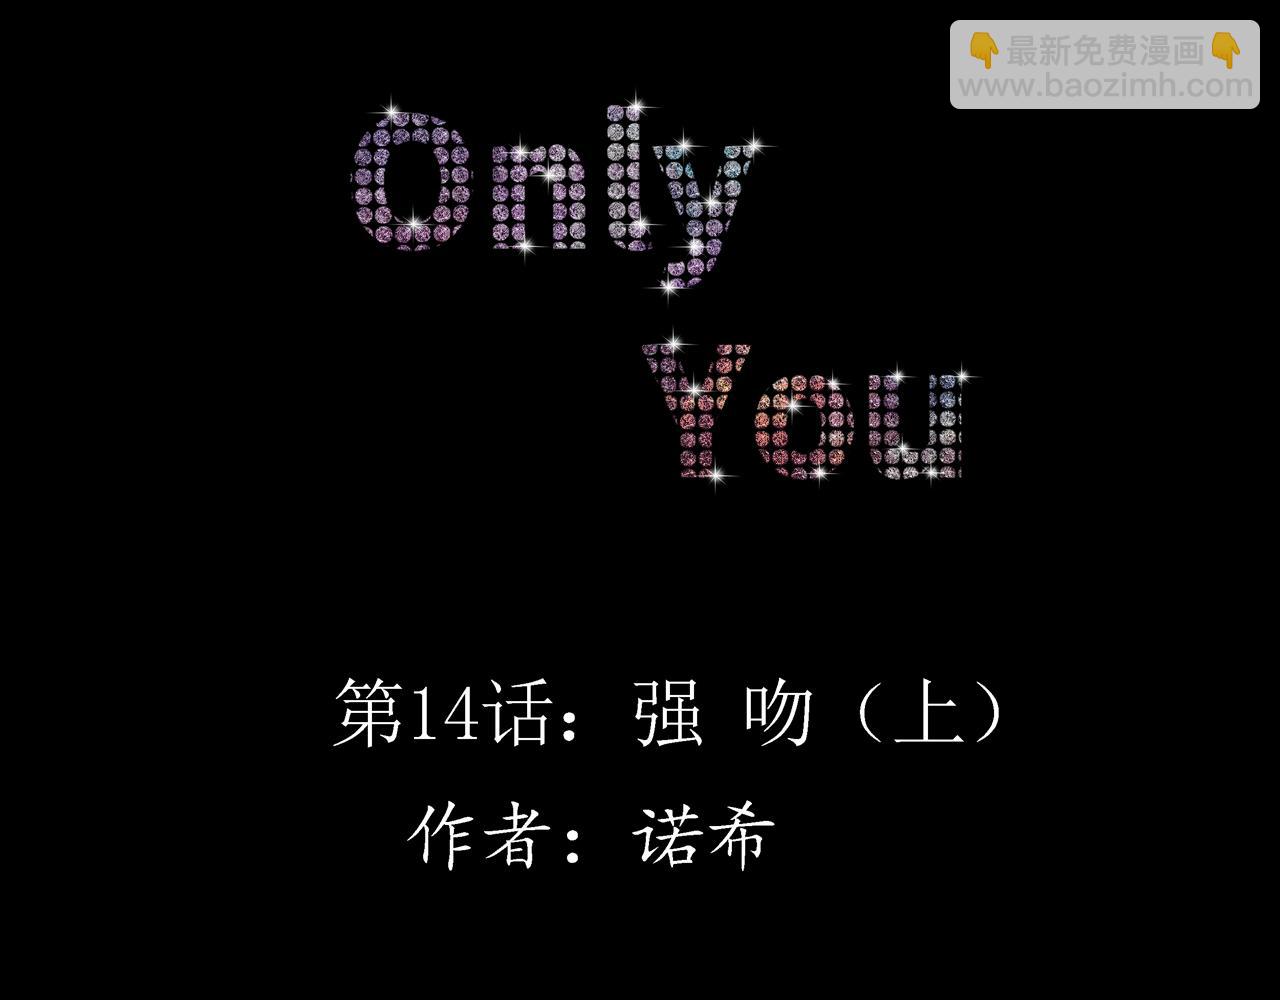 Only You - 第14話 強吻（上）(1/2) - 8